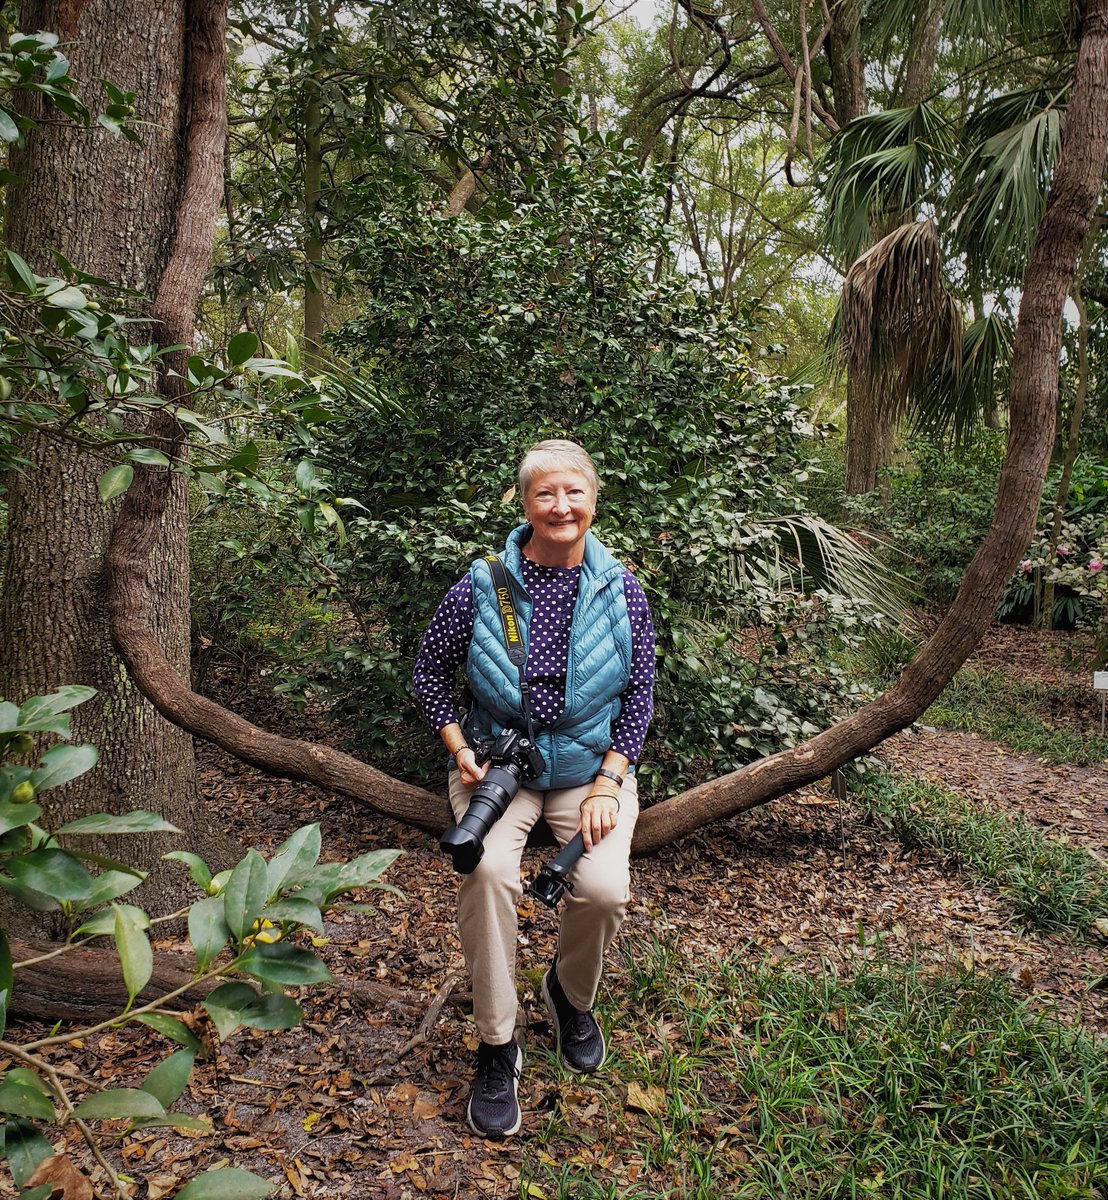 Starting off the year with Swing #1! LOL! This was taken during my visit to #KanapahaGardens in #Gainesville , Florida. It is an amazing garden, and I'll be telling you more about it soon!
.
#TravelTuesday #travelphotography #IFWTWA #Naturalnorthflorida #naturalflorida #vineswing